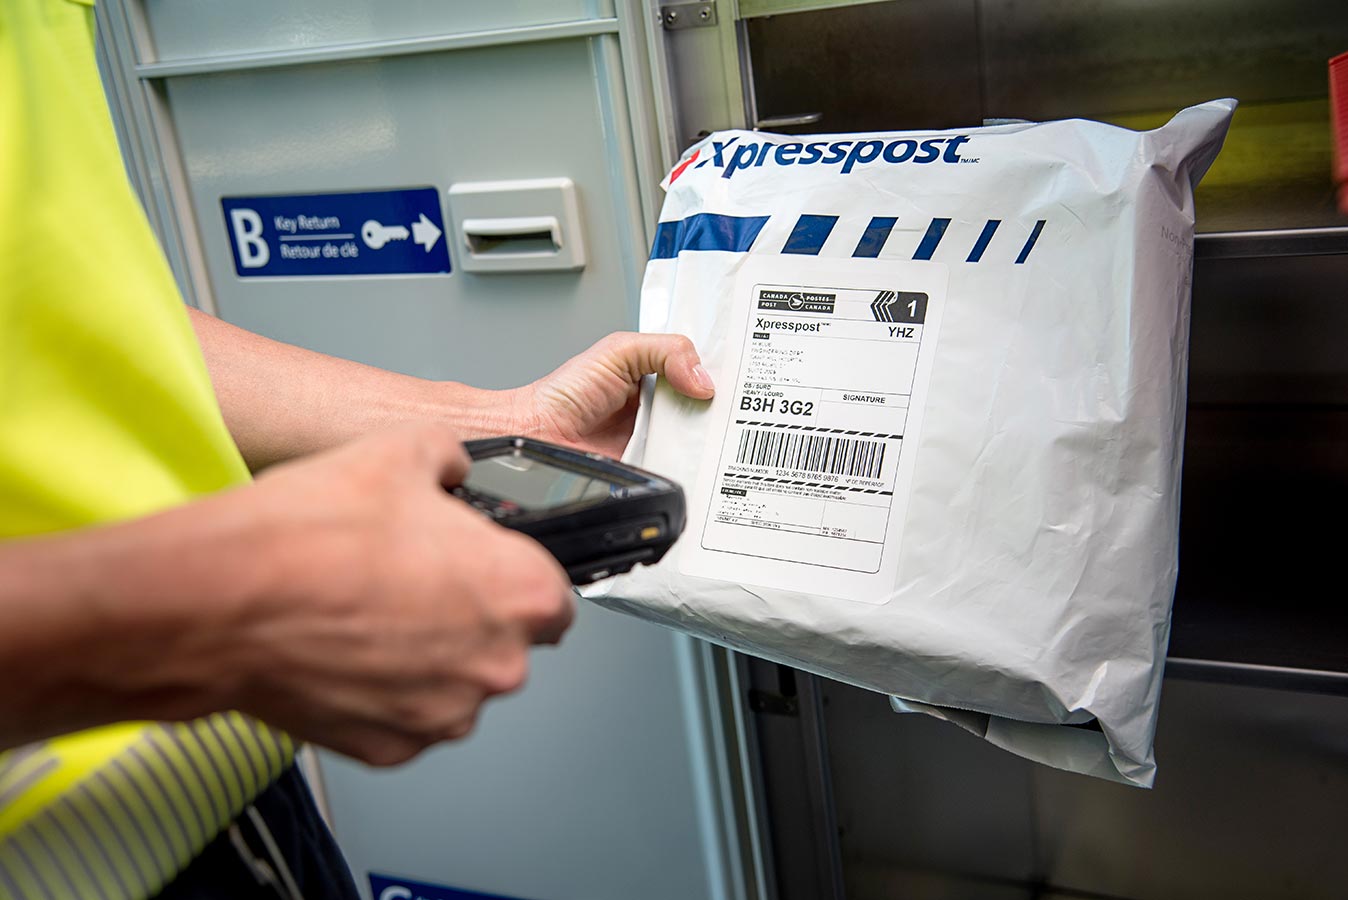 Postal worker scanning an Xpresspost™ package